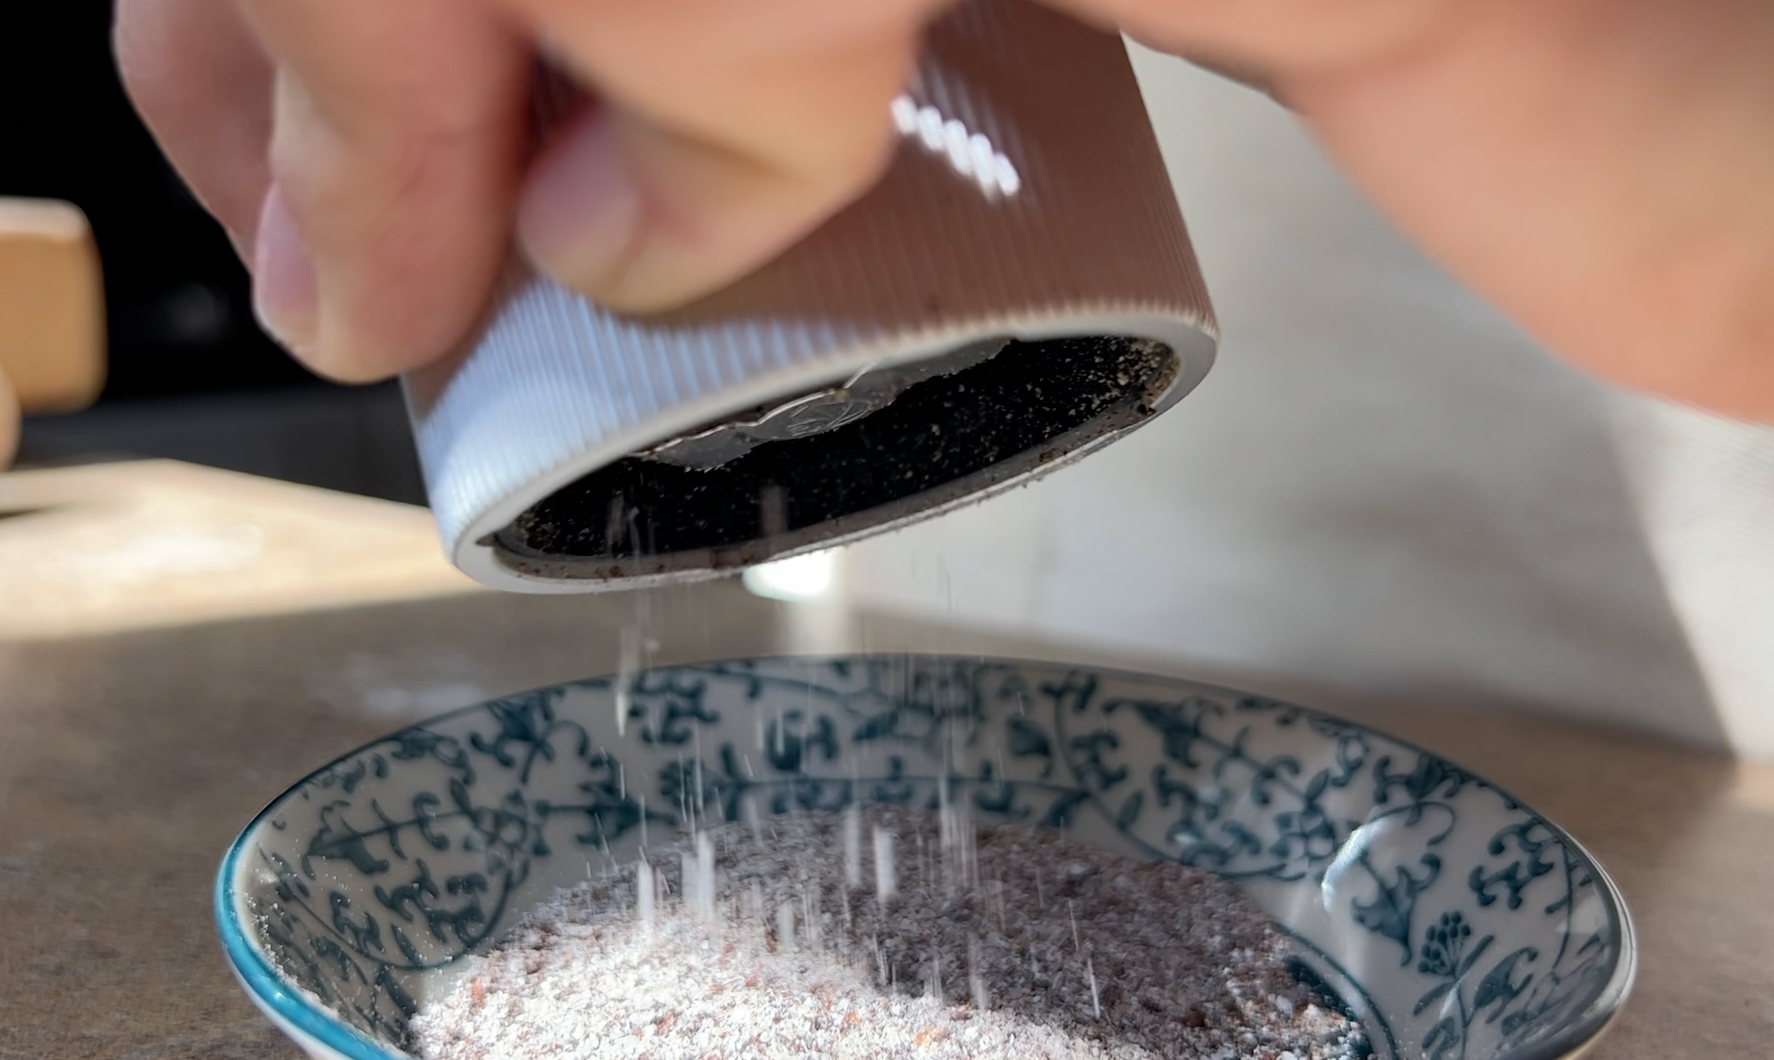 Grinding grains of paradise with a pepper mill